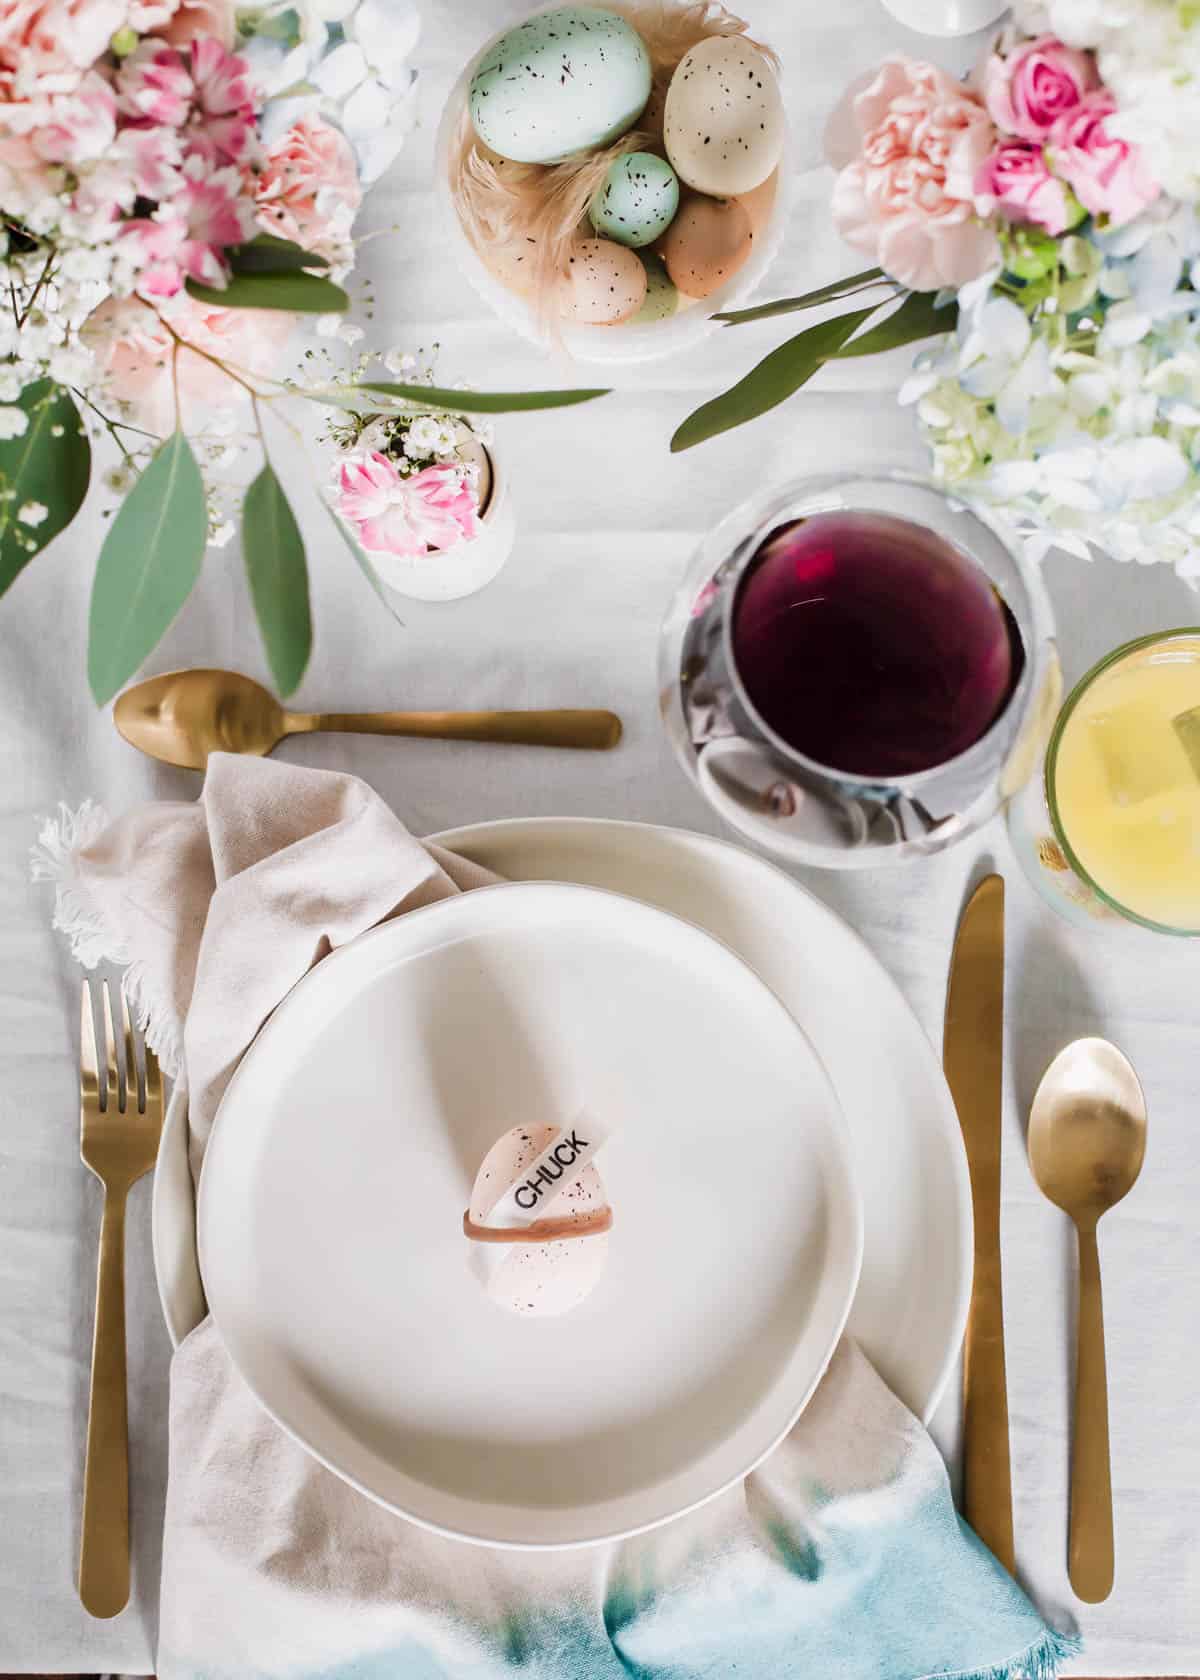 Easter place setting with egg place card holder, eggs in bowl, and flowers centerpiece.